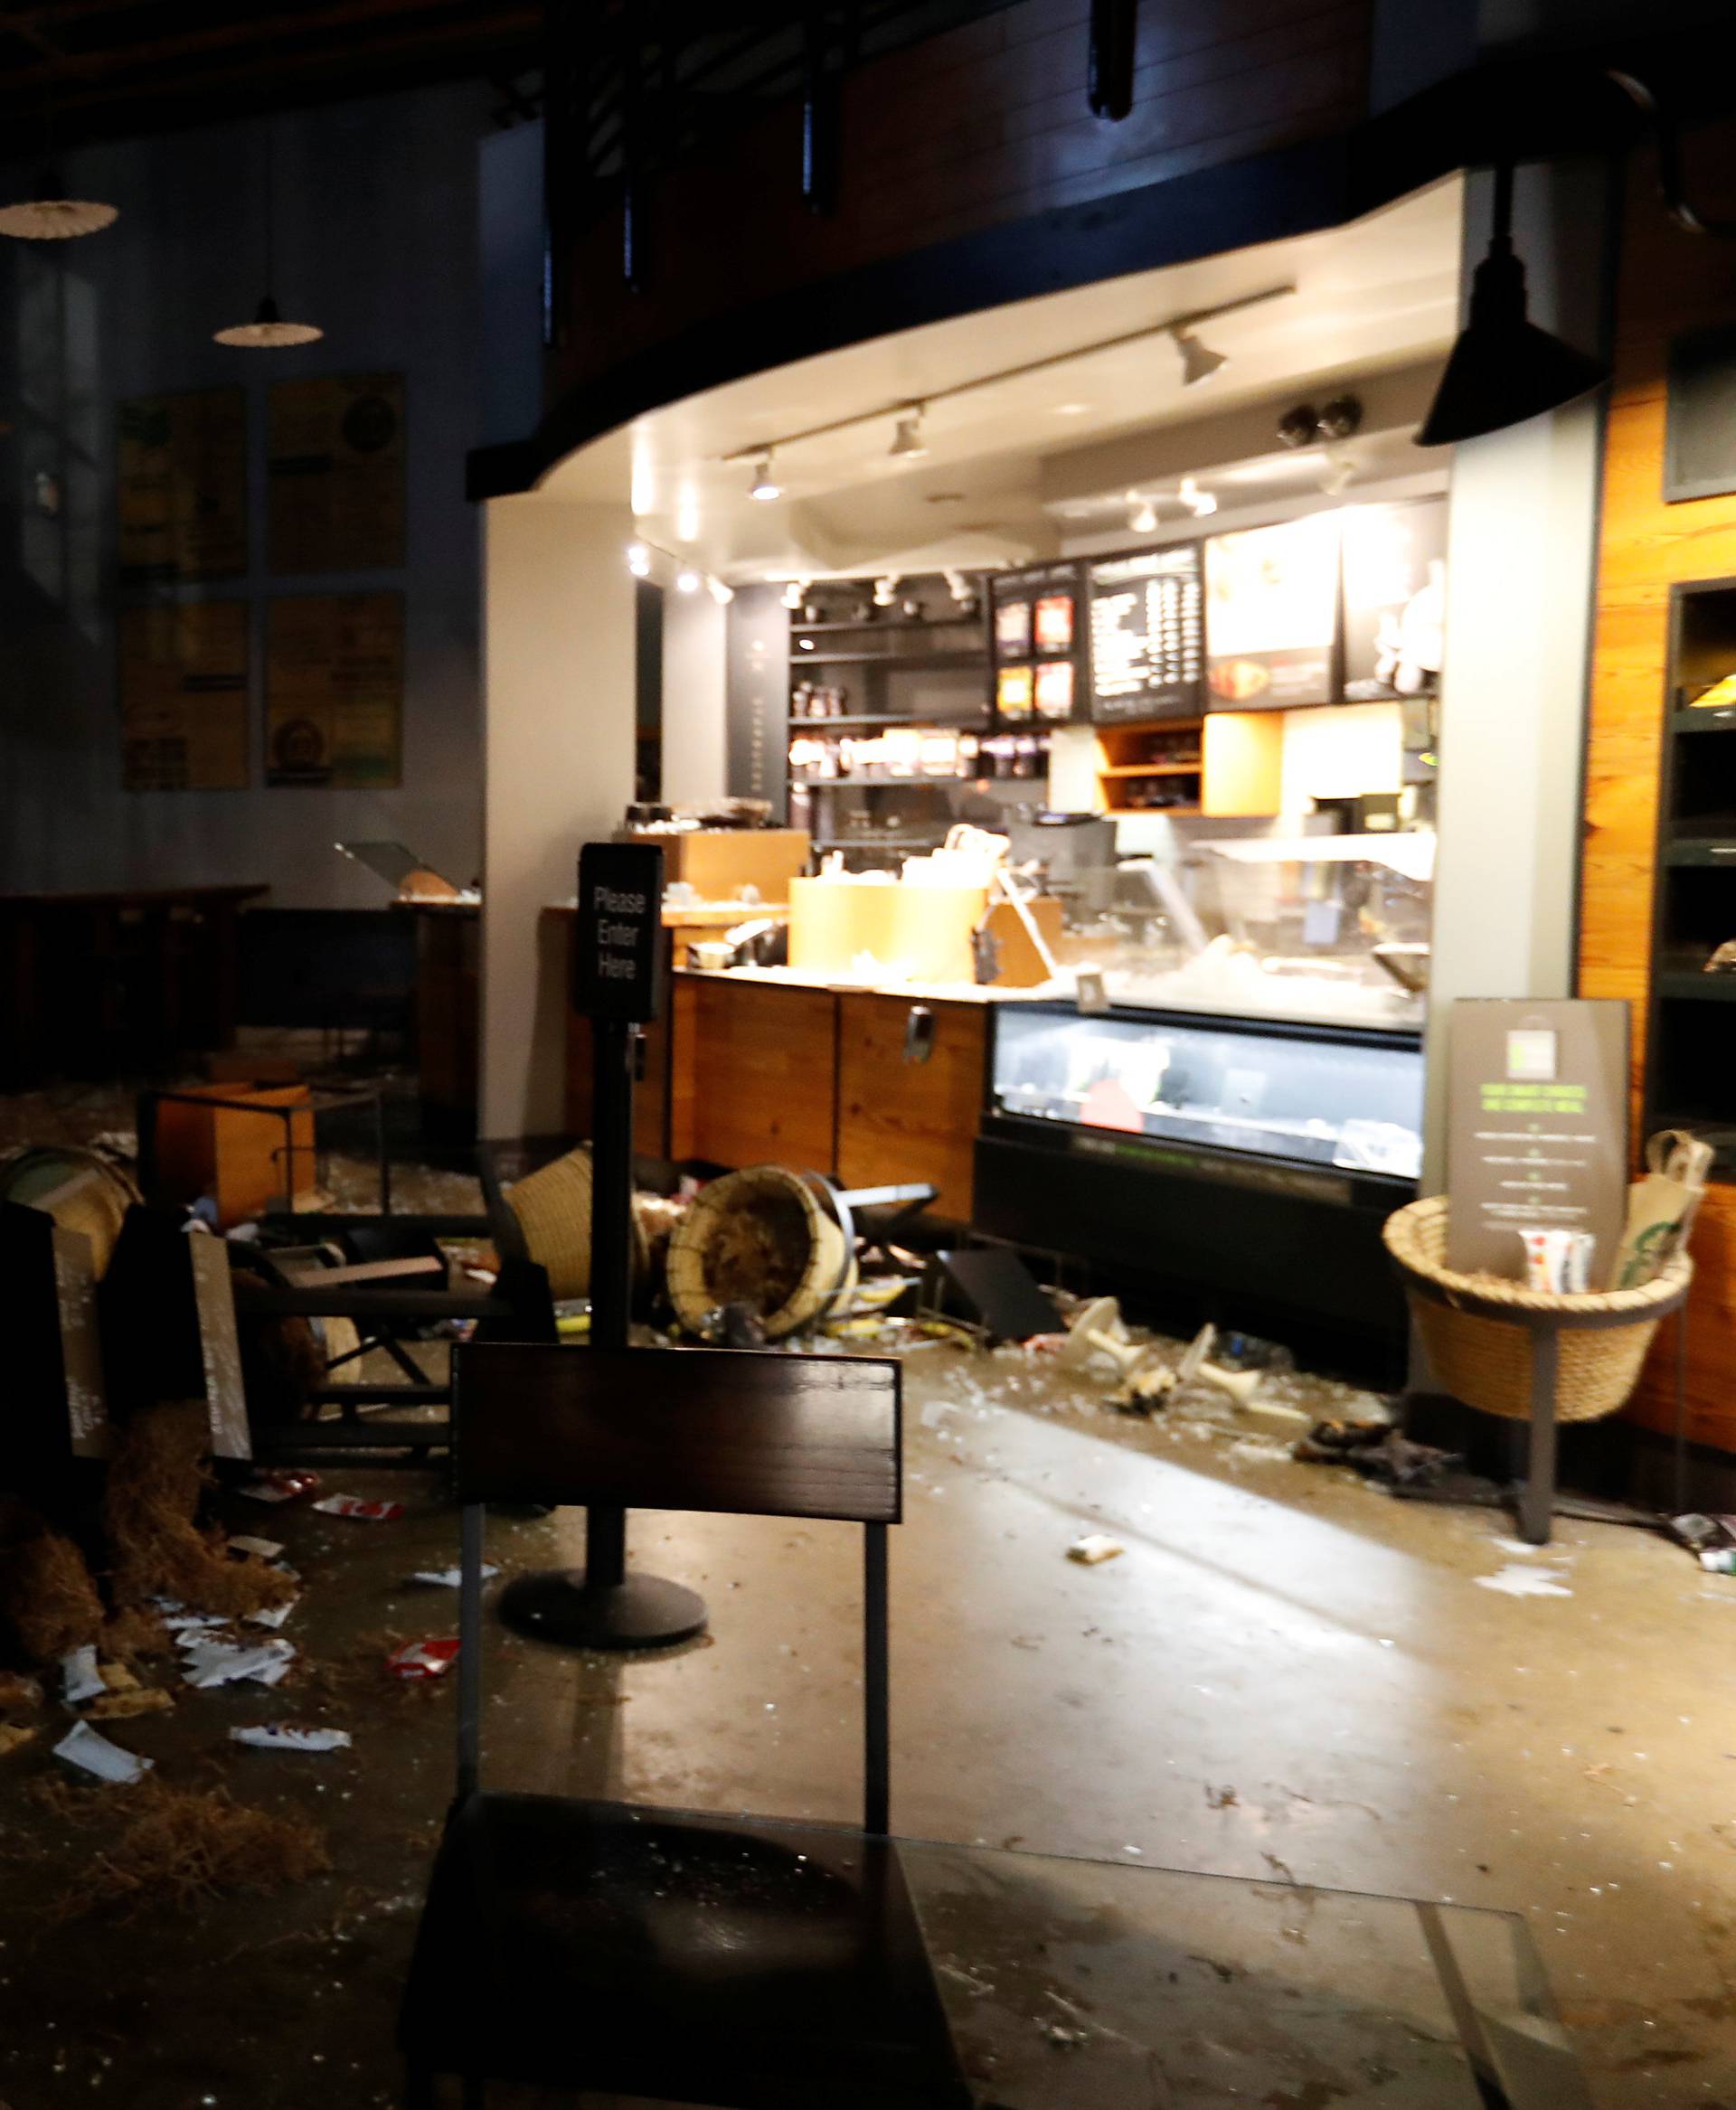 A worker surveys the damage to a vandalized Starbucks after a student protest turned violent at UC Berkeley during a demonstration over right-wing speaker Milo Yiannopoulos, who was forced to cancel his talk, in Berkeley, California